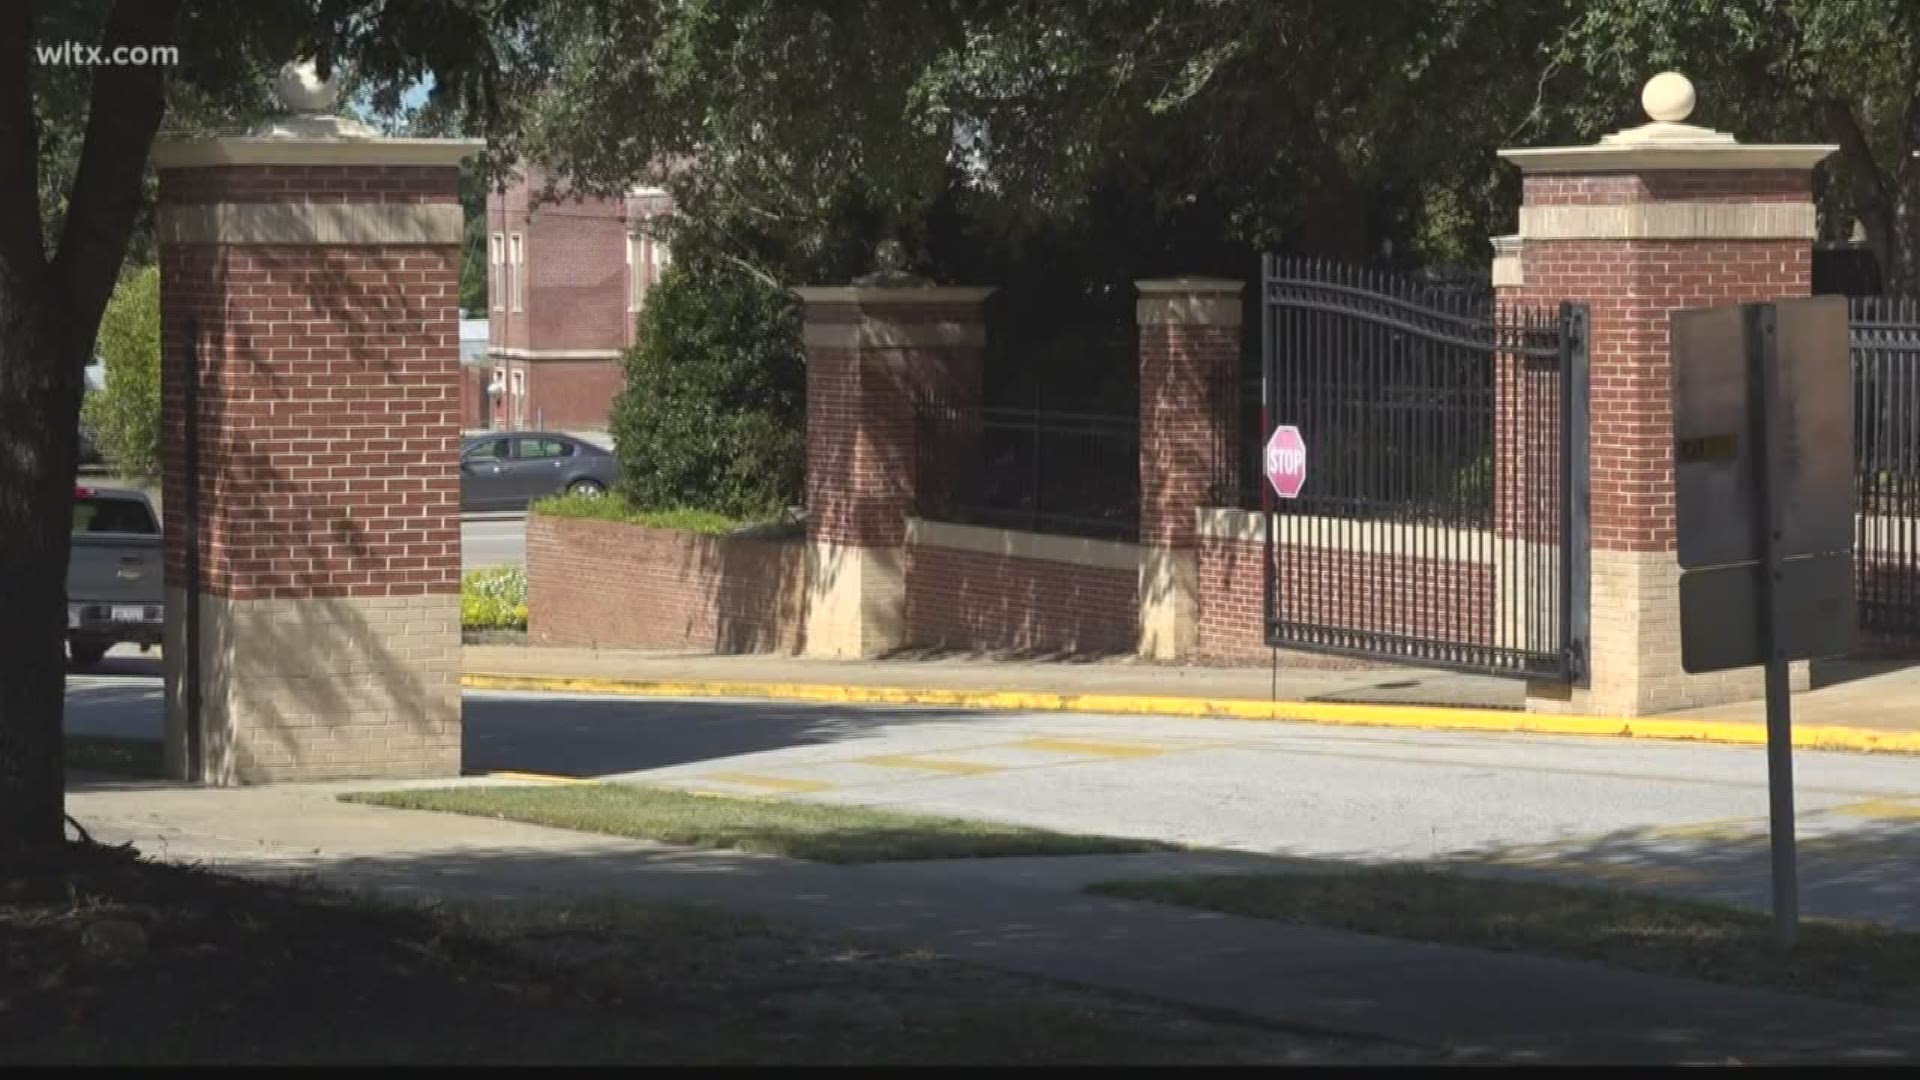 Two women were shot on the campus of South Carolina State University Friday morning, and the search is on for the suspects responsible.